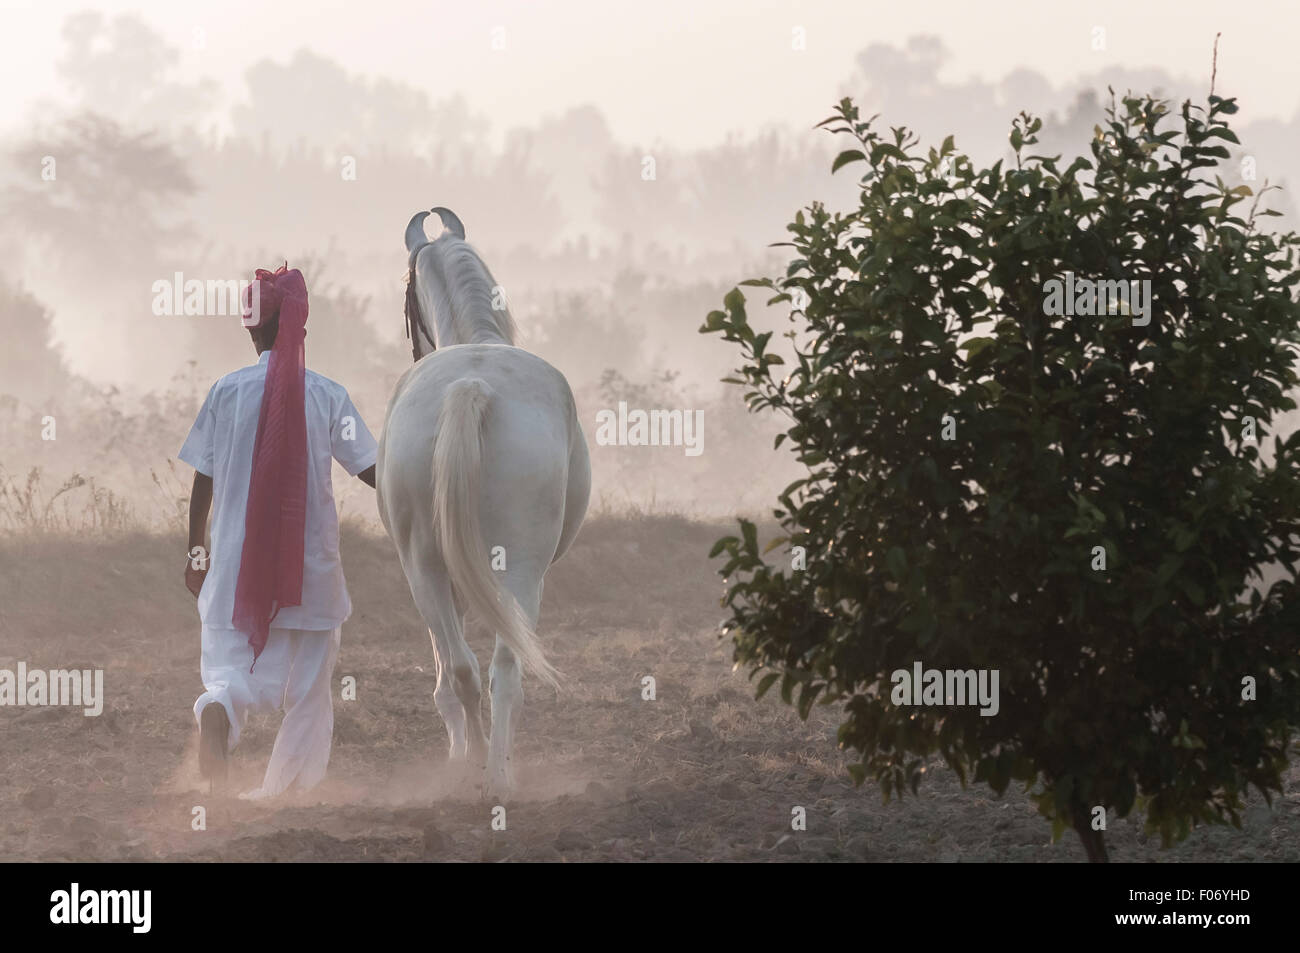 Indian man leading his marwari horse at dawn in a field with trees and mist in the background and a tree in the foreground Stock Photo